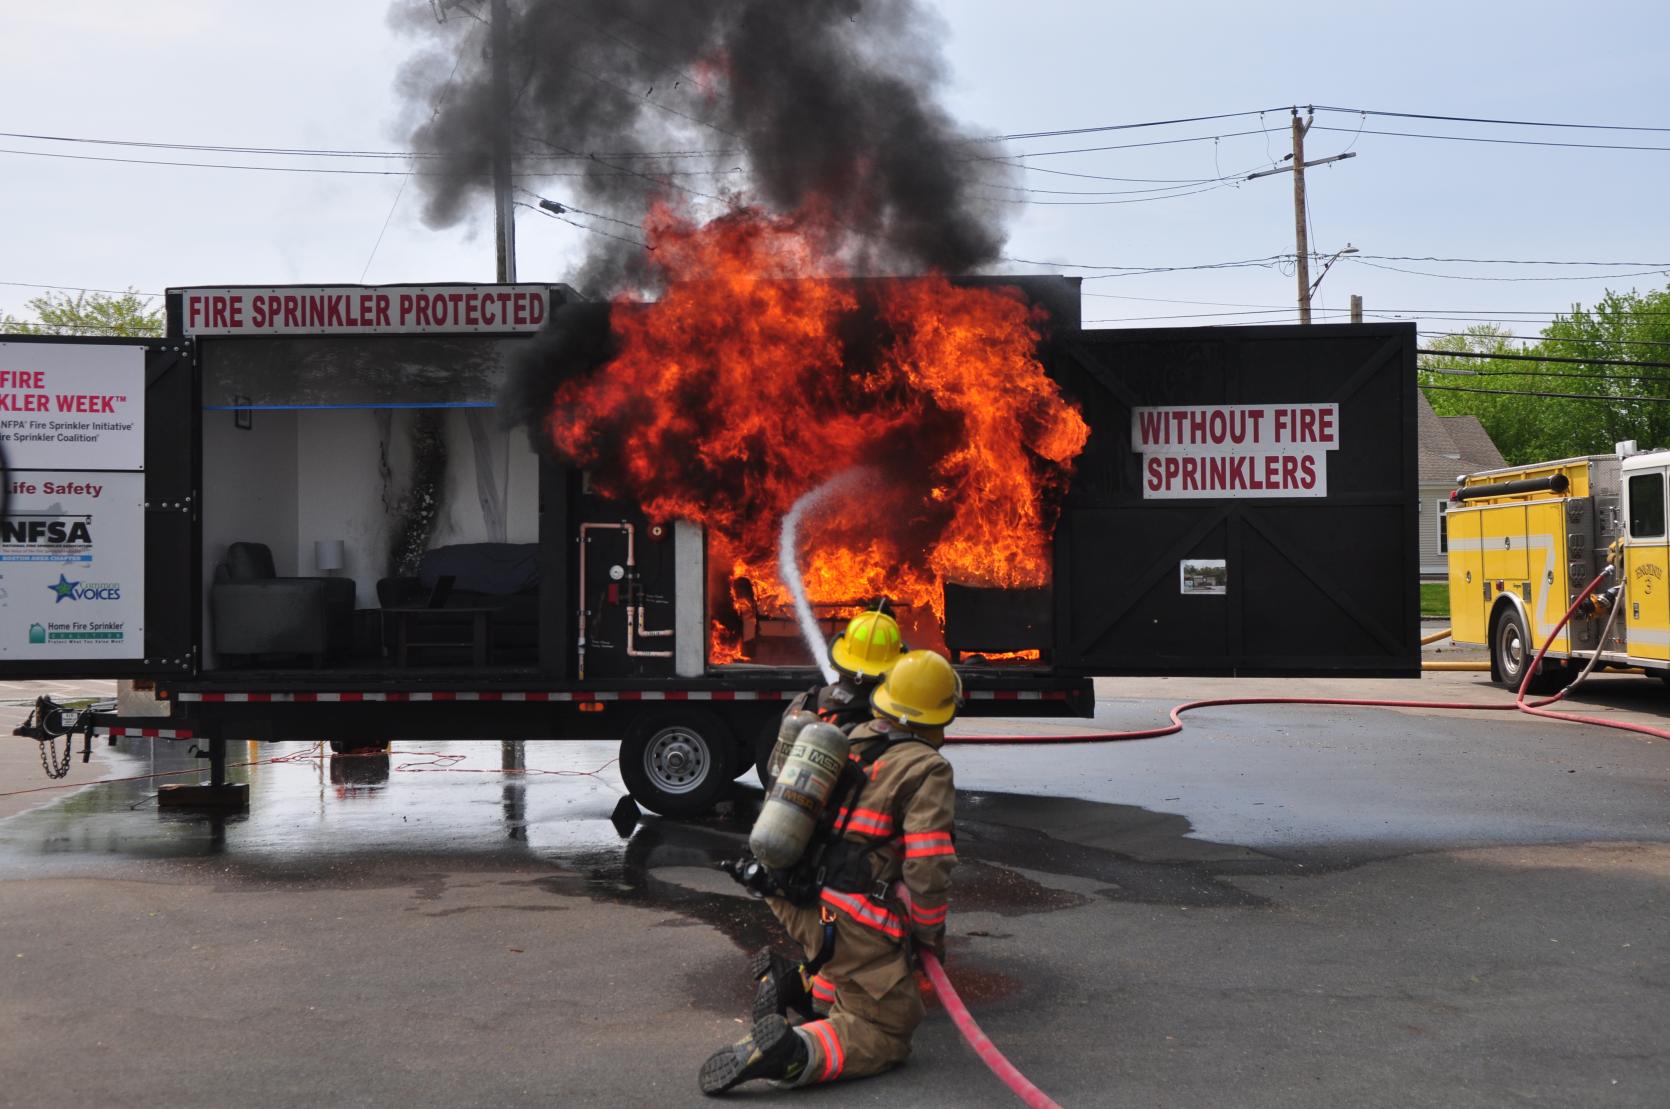 A picture of firefighters using a firehose to extinguish a fire on a trailer